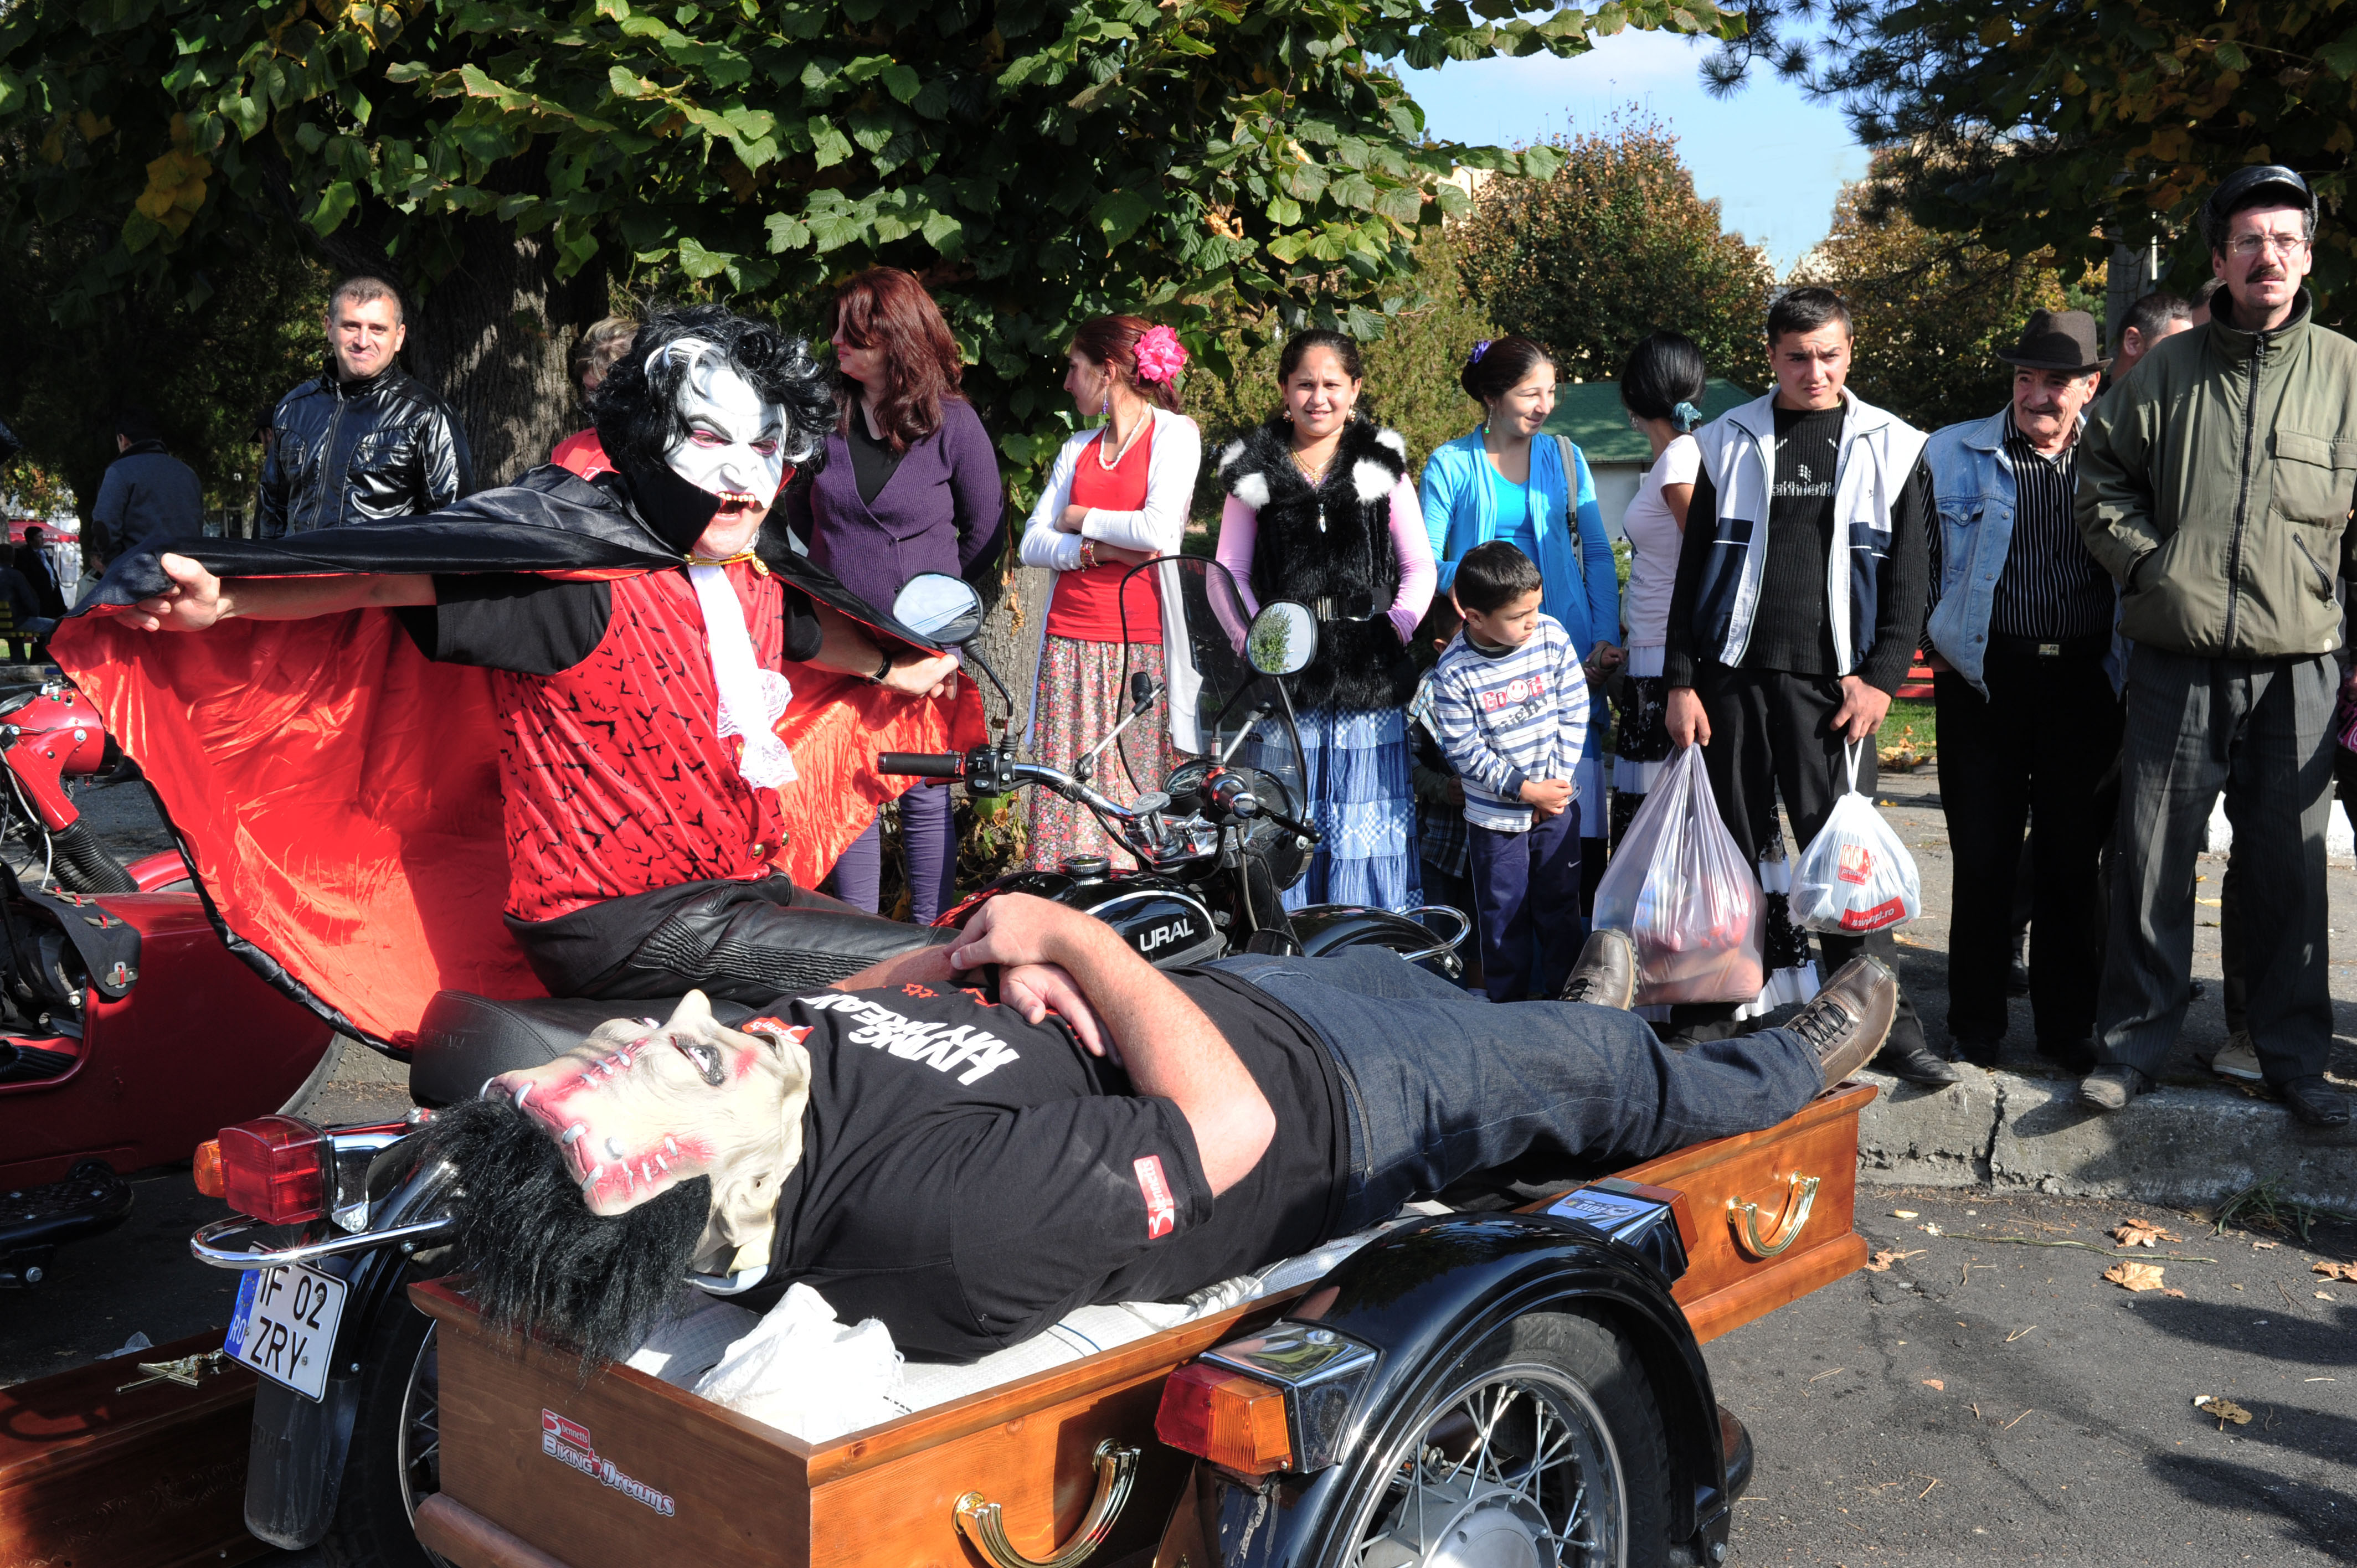 ‘Vampire fanatic’ rides to Dracula’s Castle for Halloween